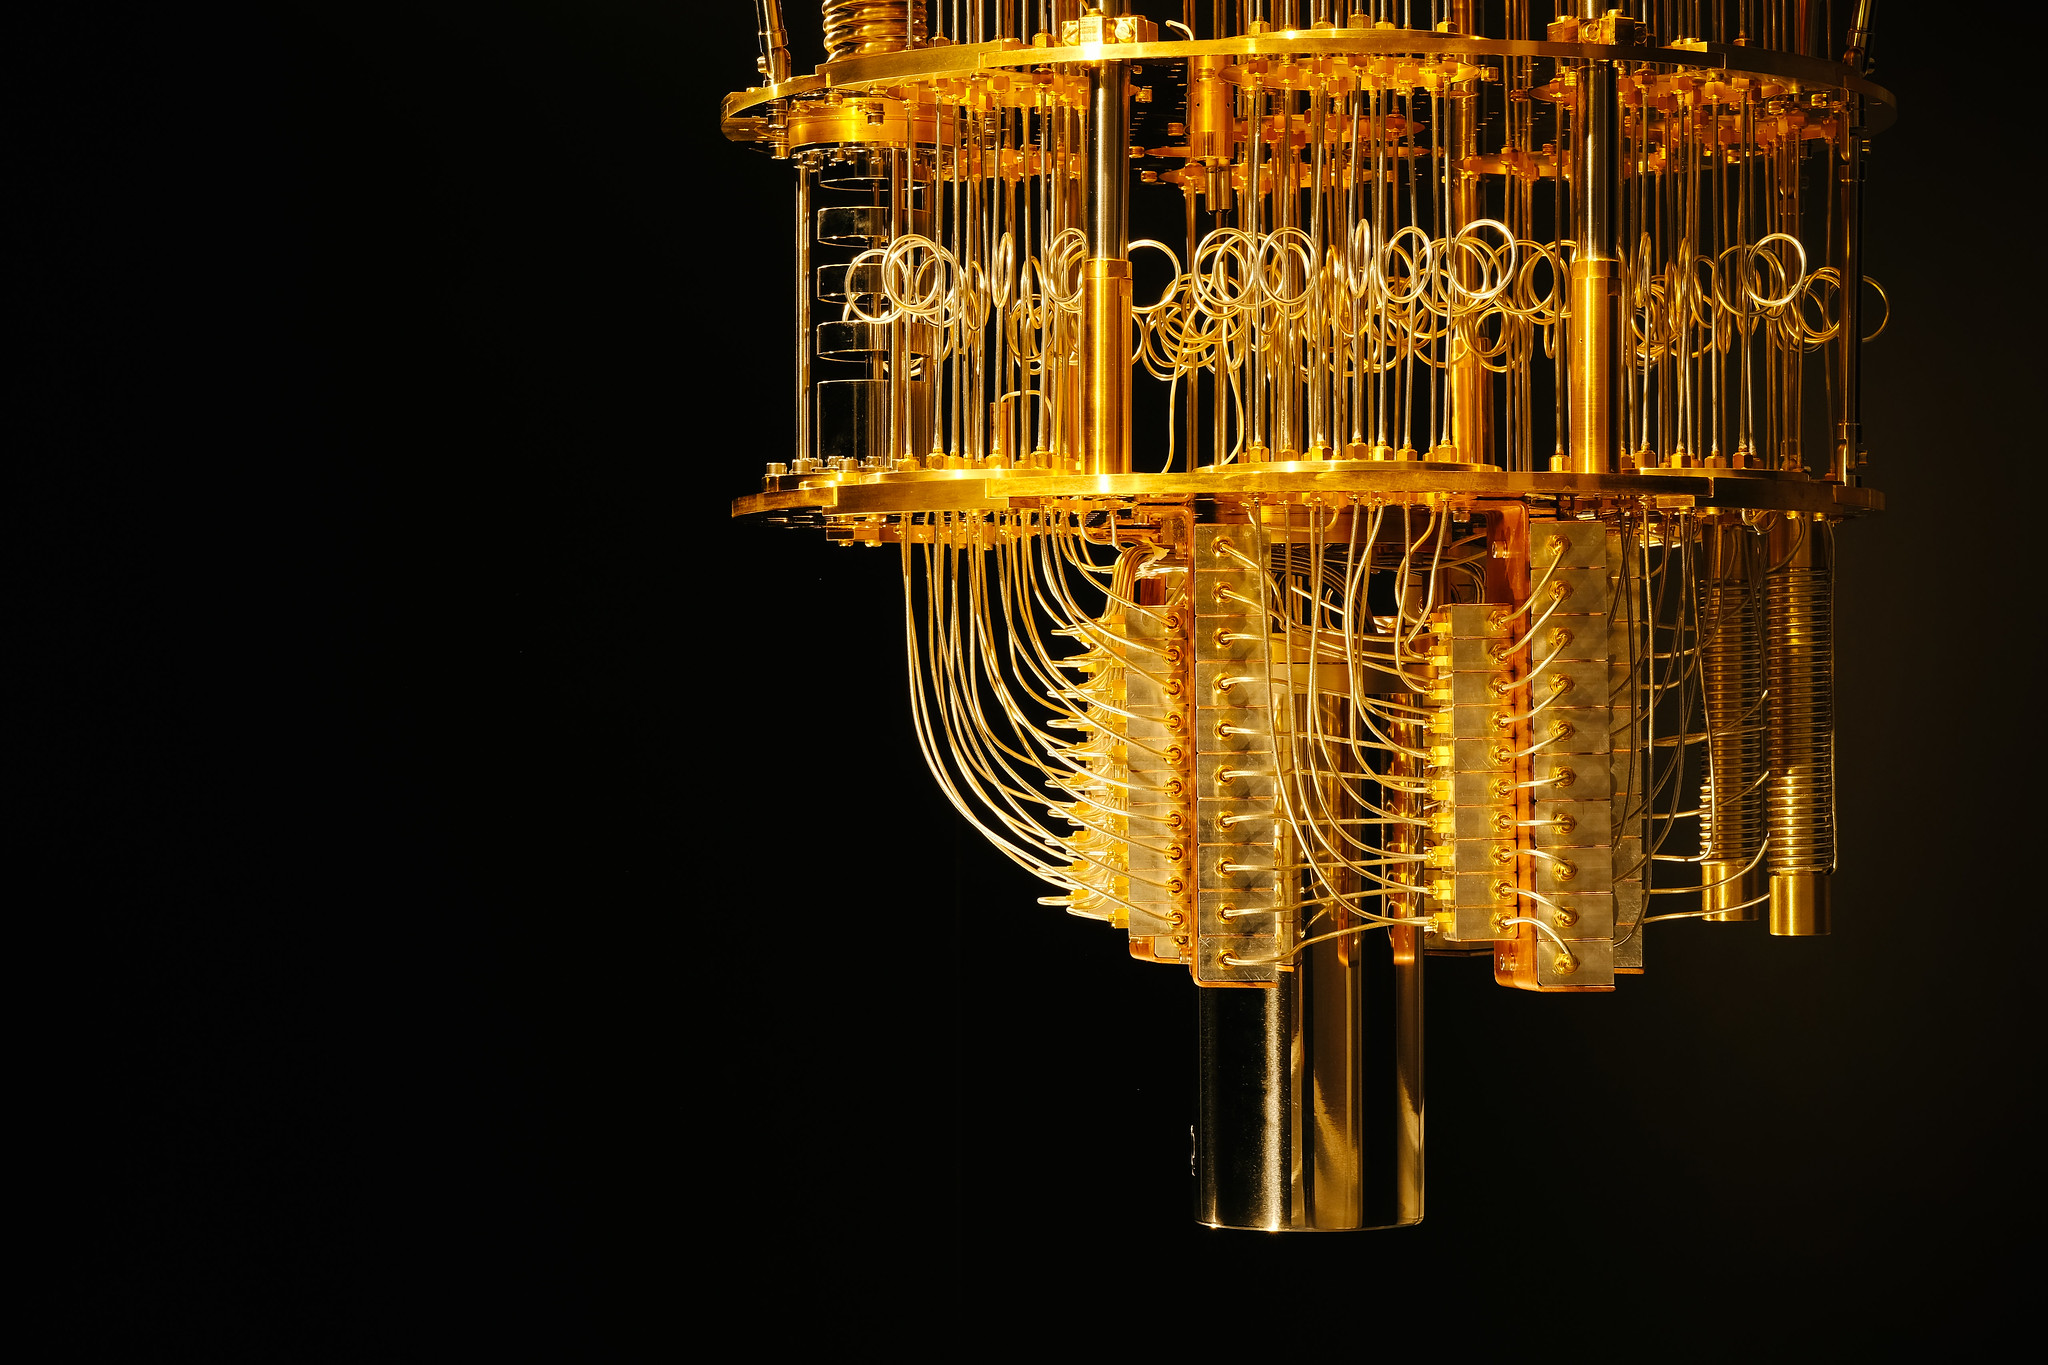 A photograph of a golden-colored quantum computer against a black background.